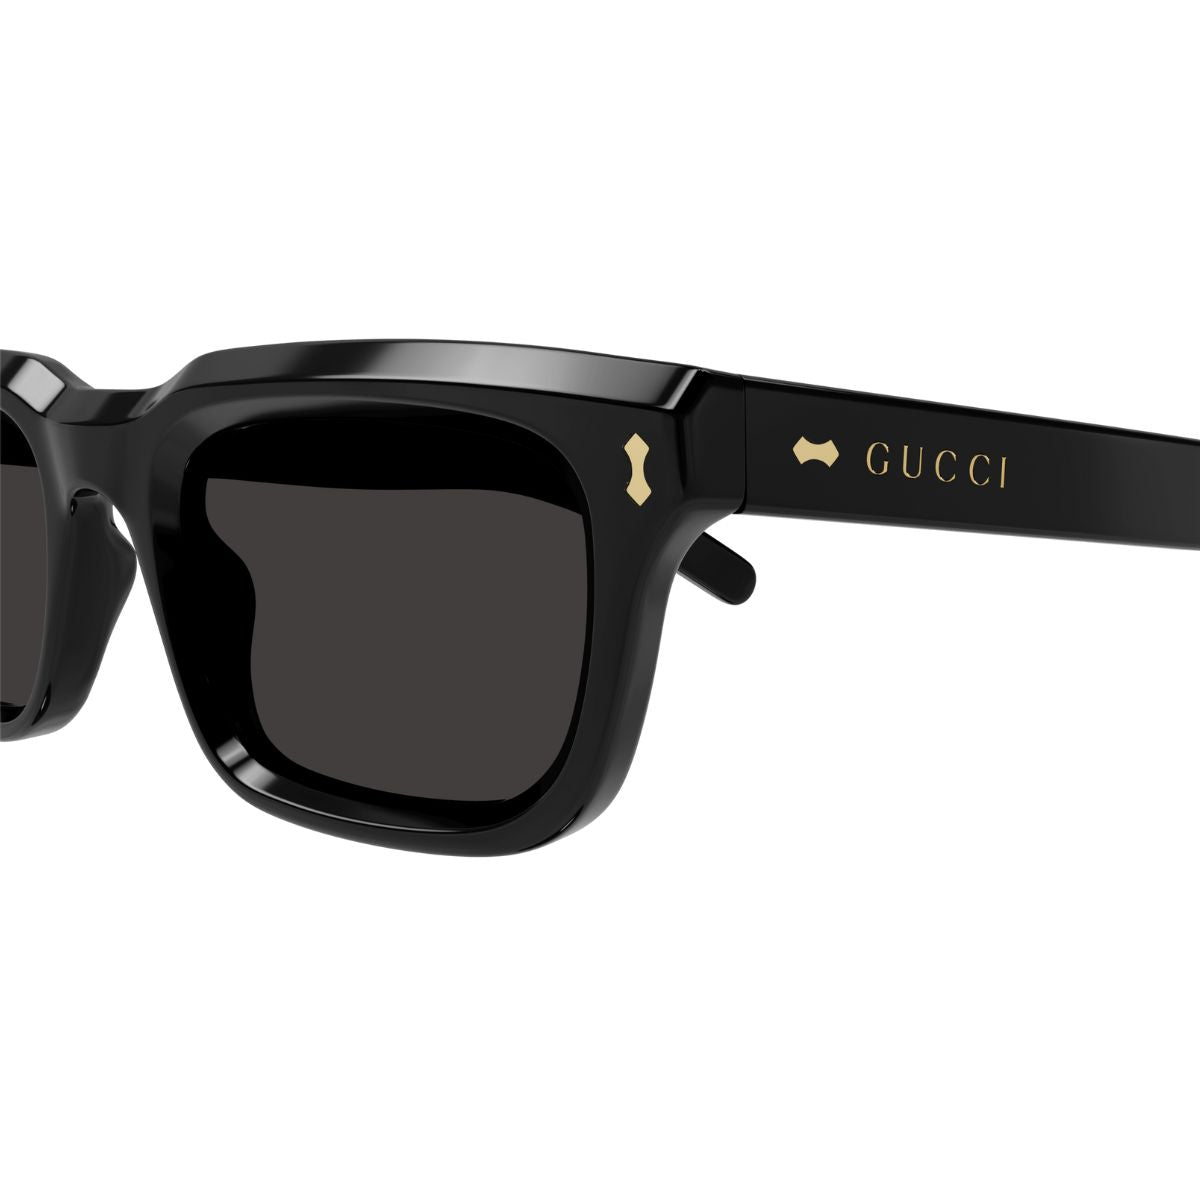 "Fashion-Forward Gucci 1524S 001 Eyewear for Men - Stylish and functional sunglasses available at Optorium."